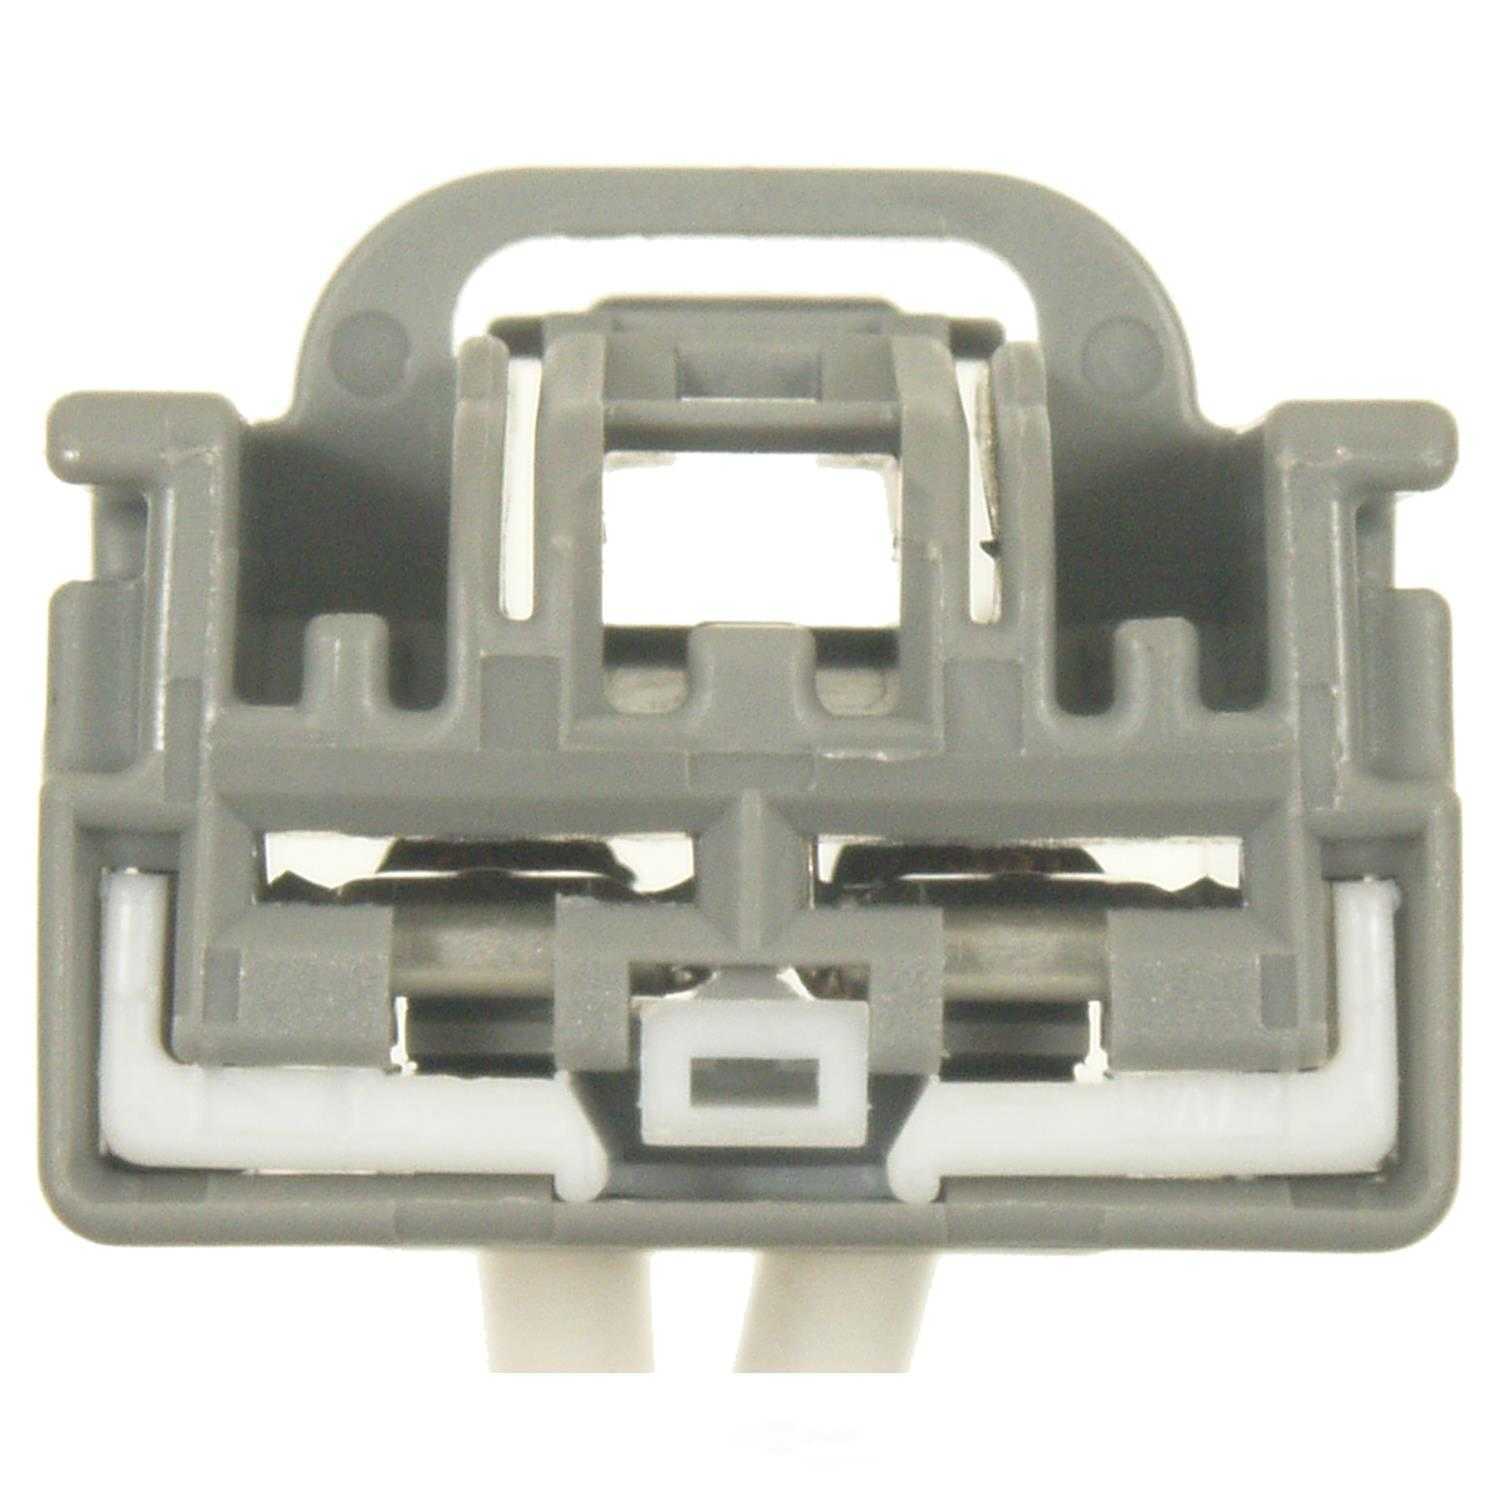 STANDARD MOTOR PRODUCTS - Radio Amplifier Connector - STA - s-1353